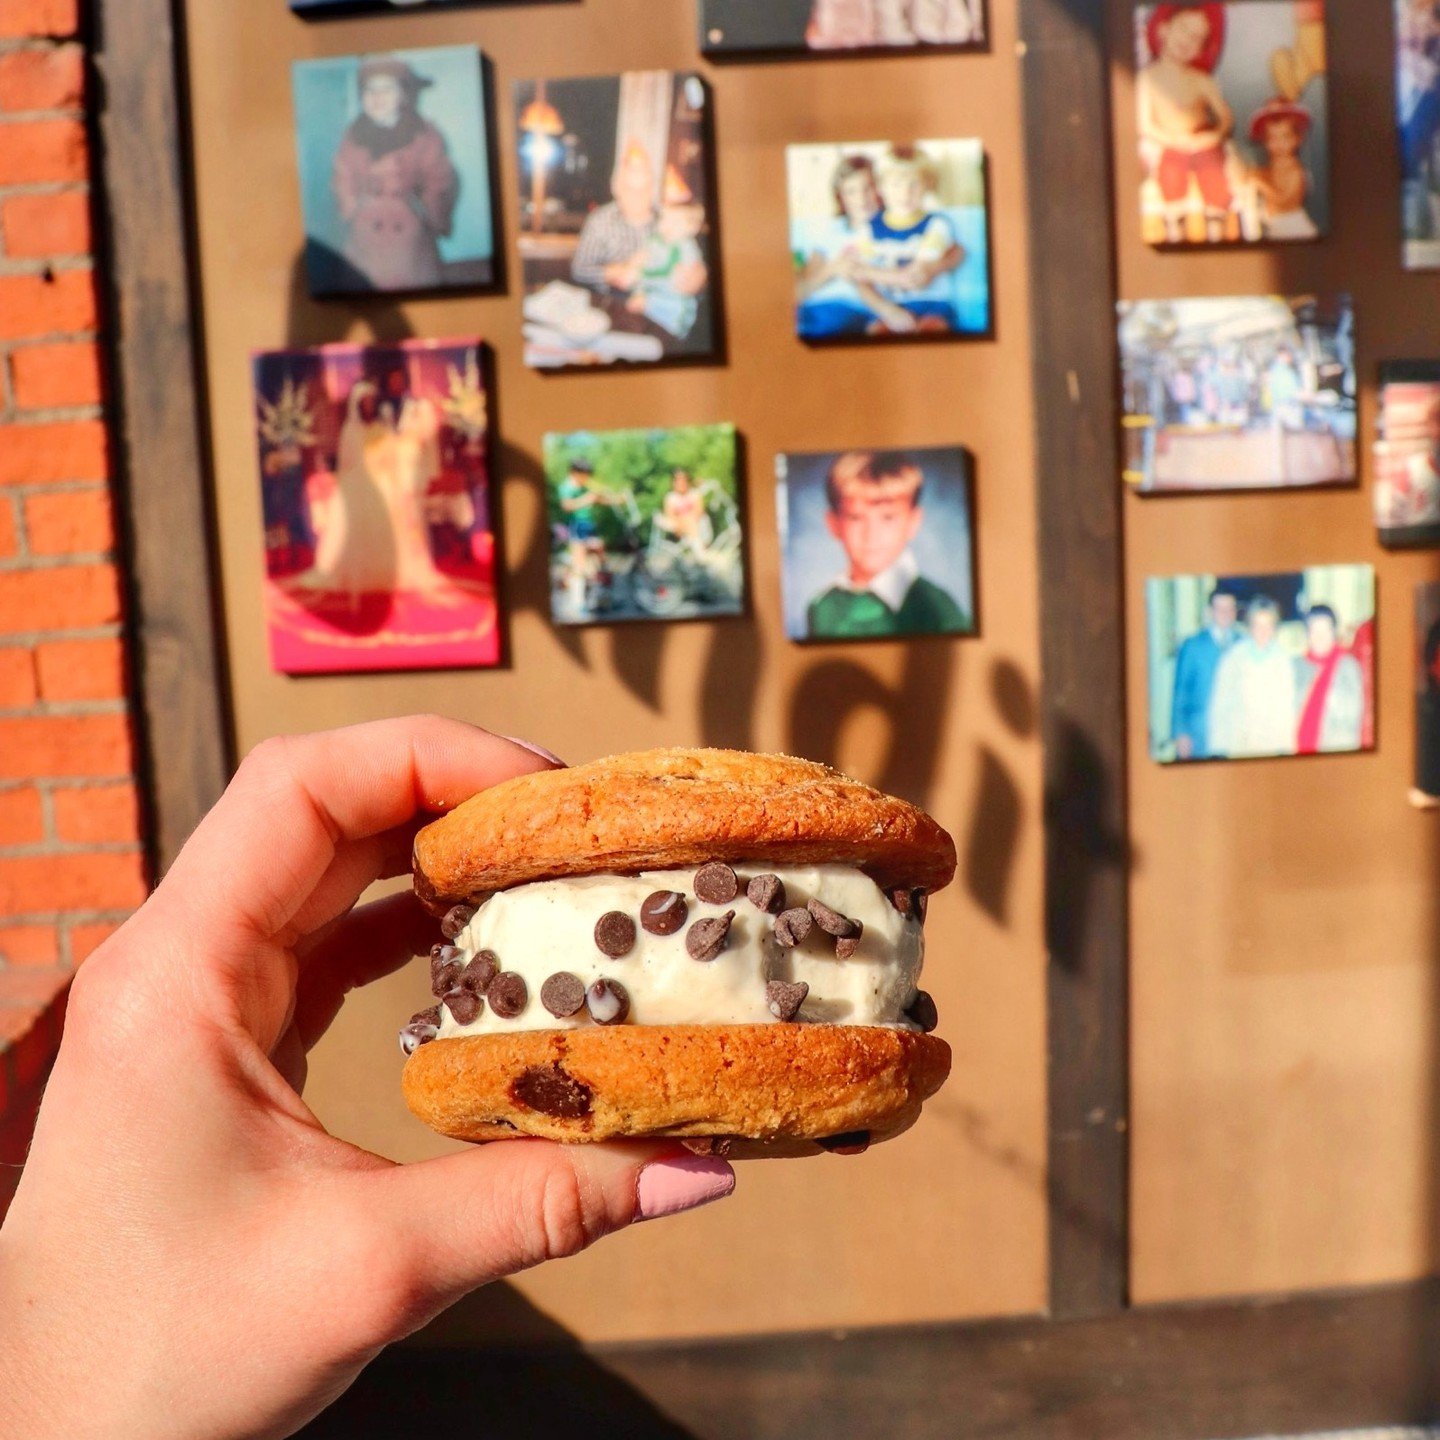 Around here we do Sunday with a side of ice cream! Ray's vanilla ice cream sandwiched between two housemade chocolate chip cookies.

#icecream #dessert #downtownroy